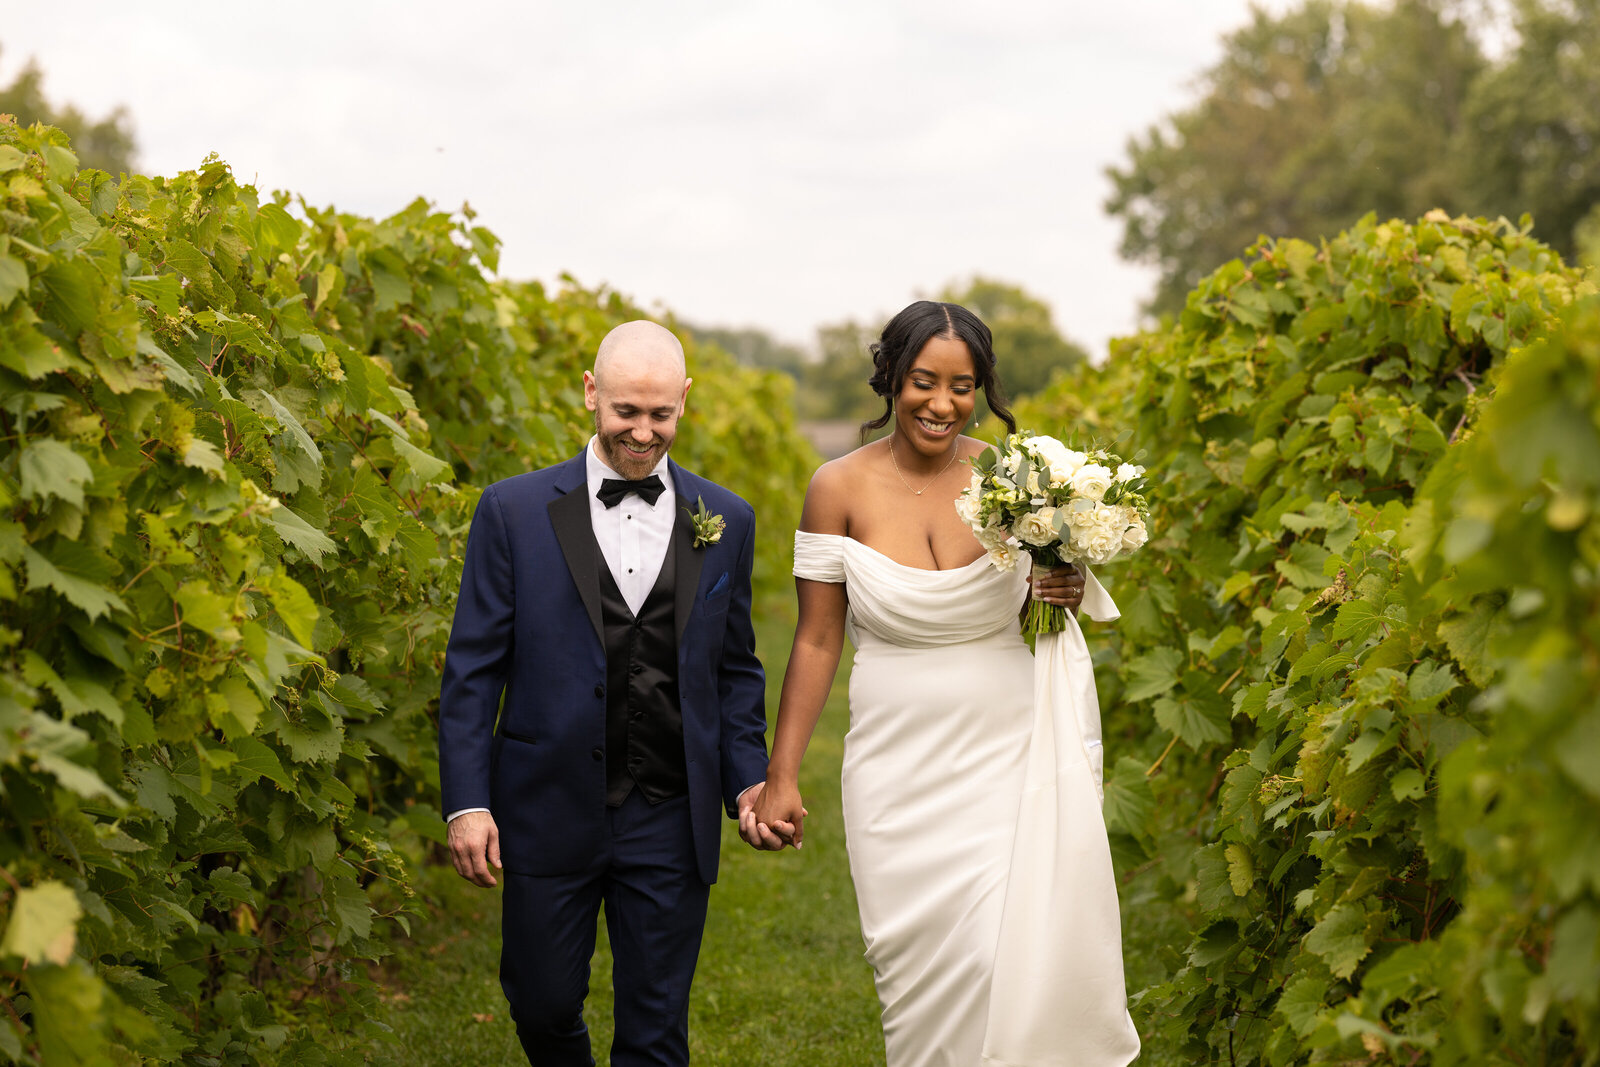 Groom and bride happily walk down the aisles of a vineyard at Gervasi Vineyard located in Canton Ohio. Photo taken by Aaron Aldhizer